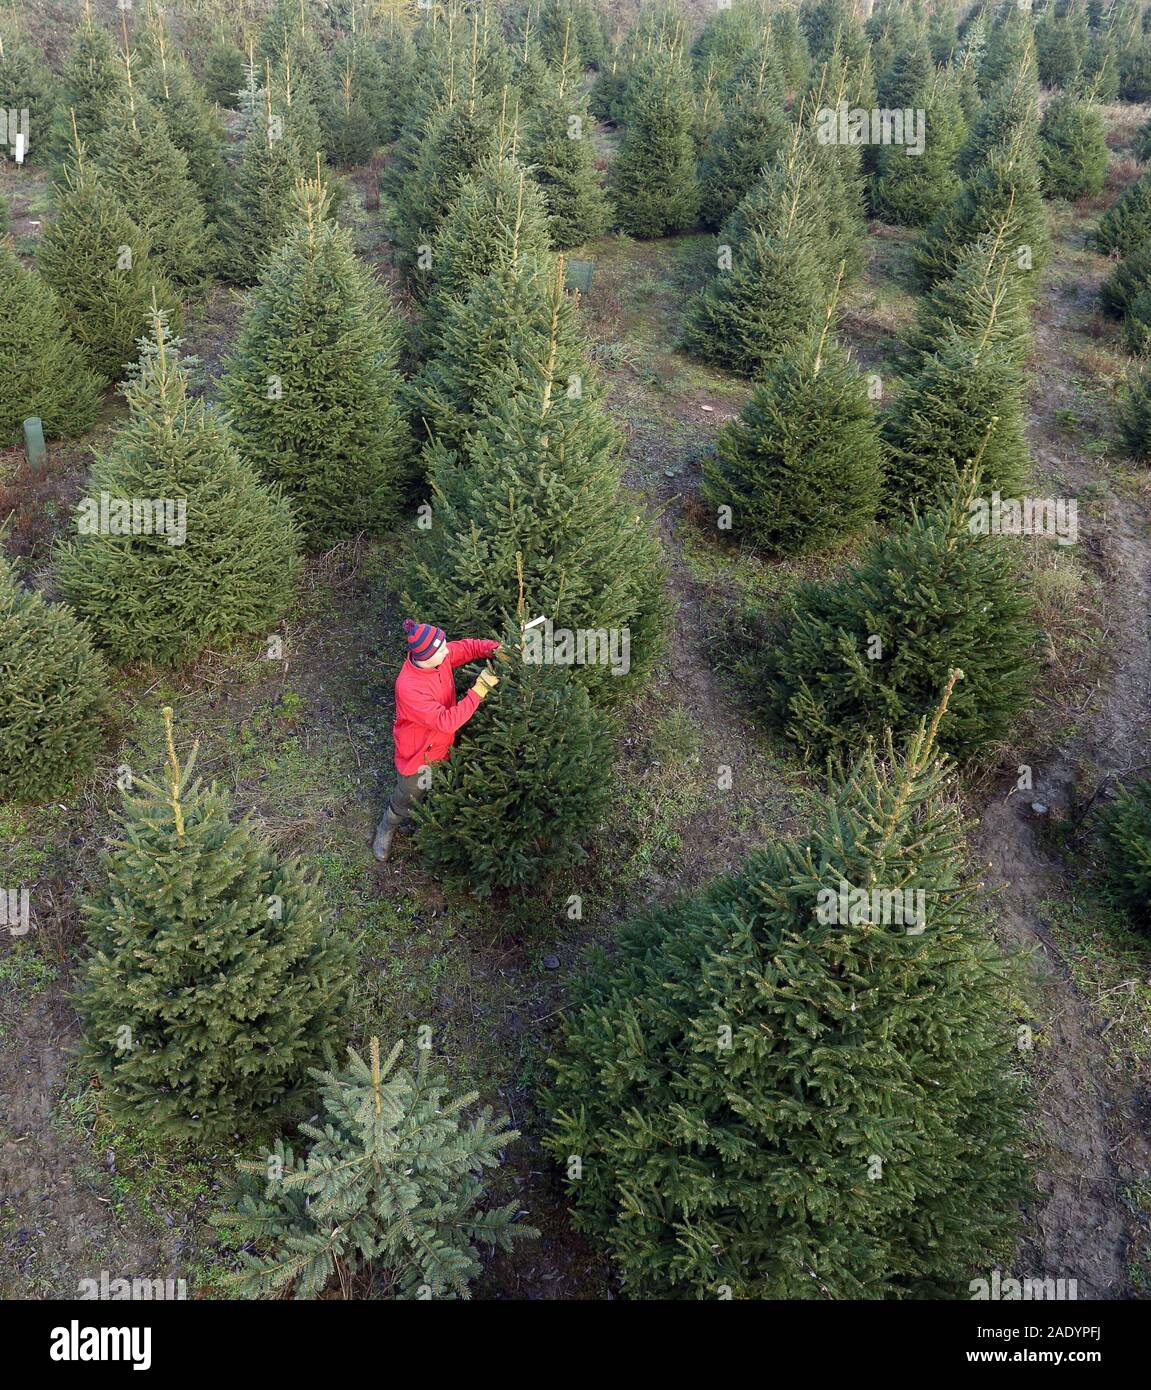 Tallington Christmas Trees are busy with customer orders as Will Thurlby selects a Christmas tree from over 7 acres of Norway Spruce and Blue Spruce from the family-run Tallington Farm, near Stamford, Lincs., on December 4, 2019. Stock Photo